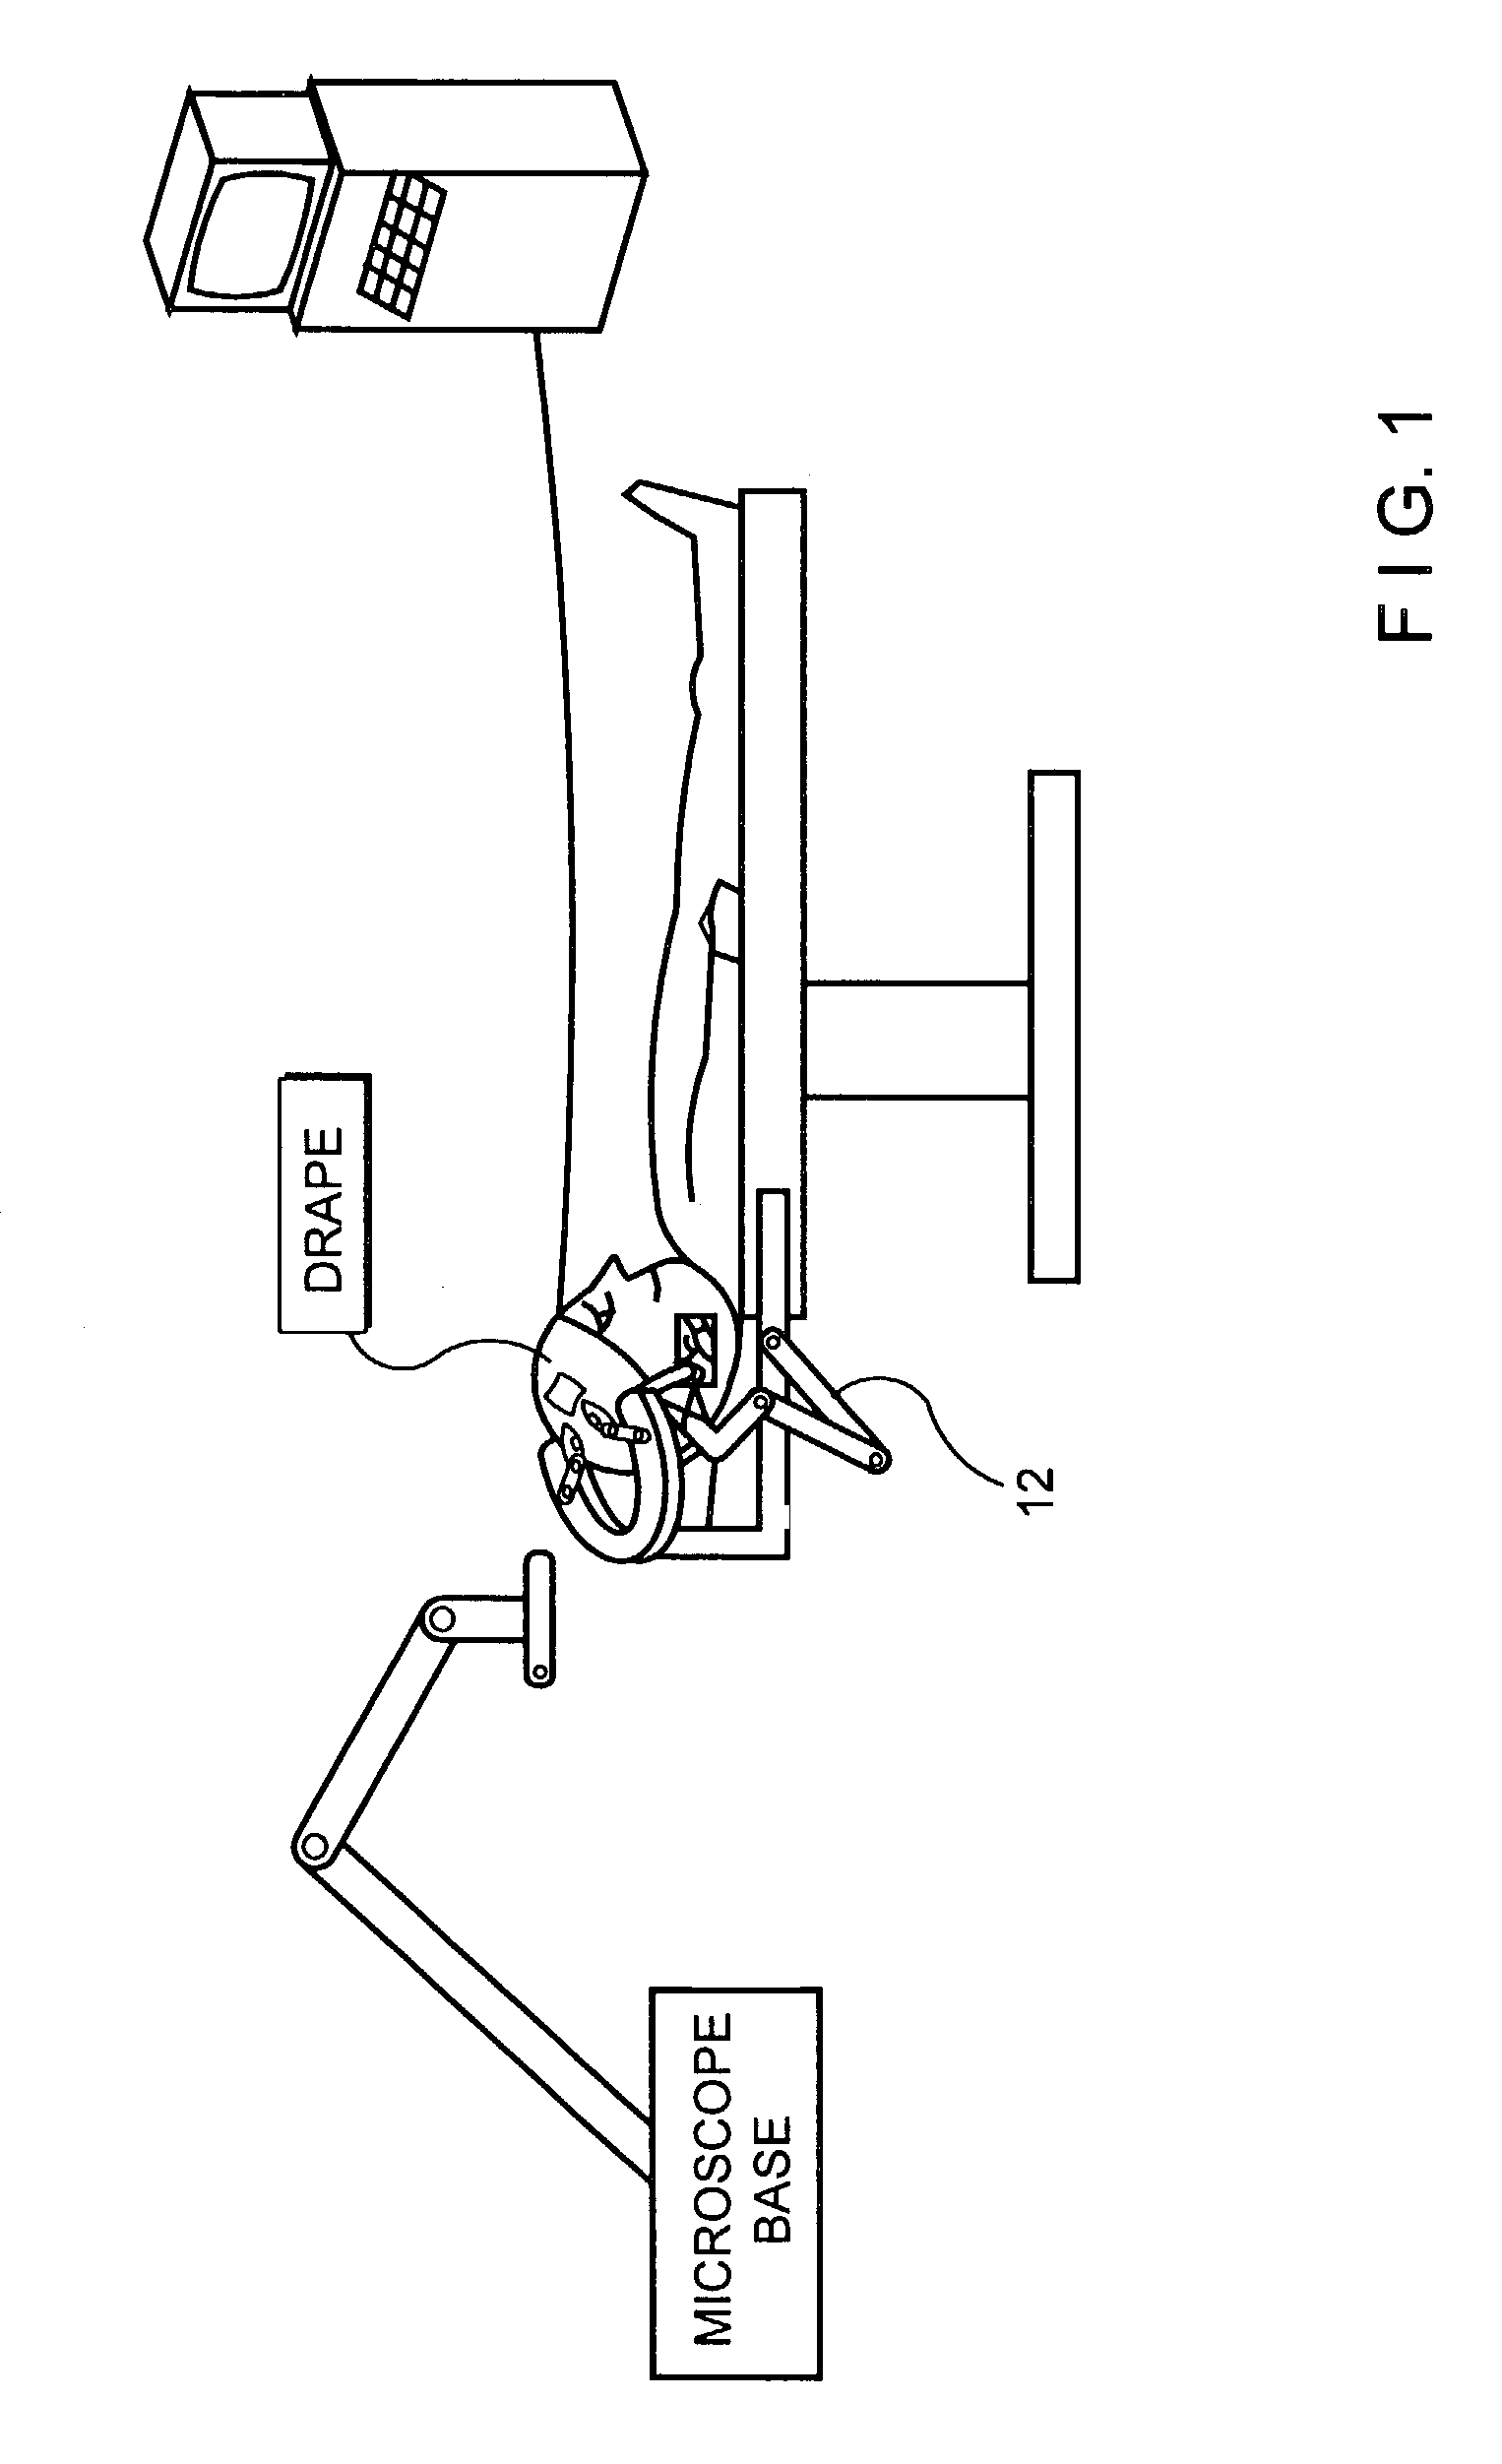 Method and apparatus for controlling a surgical robot to mimic, harmonize and enhance the natural neurophysiological behavior of a surgeon